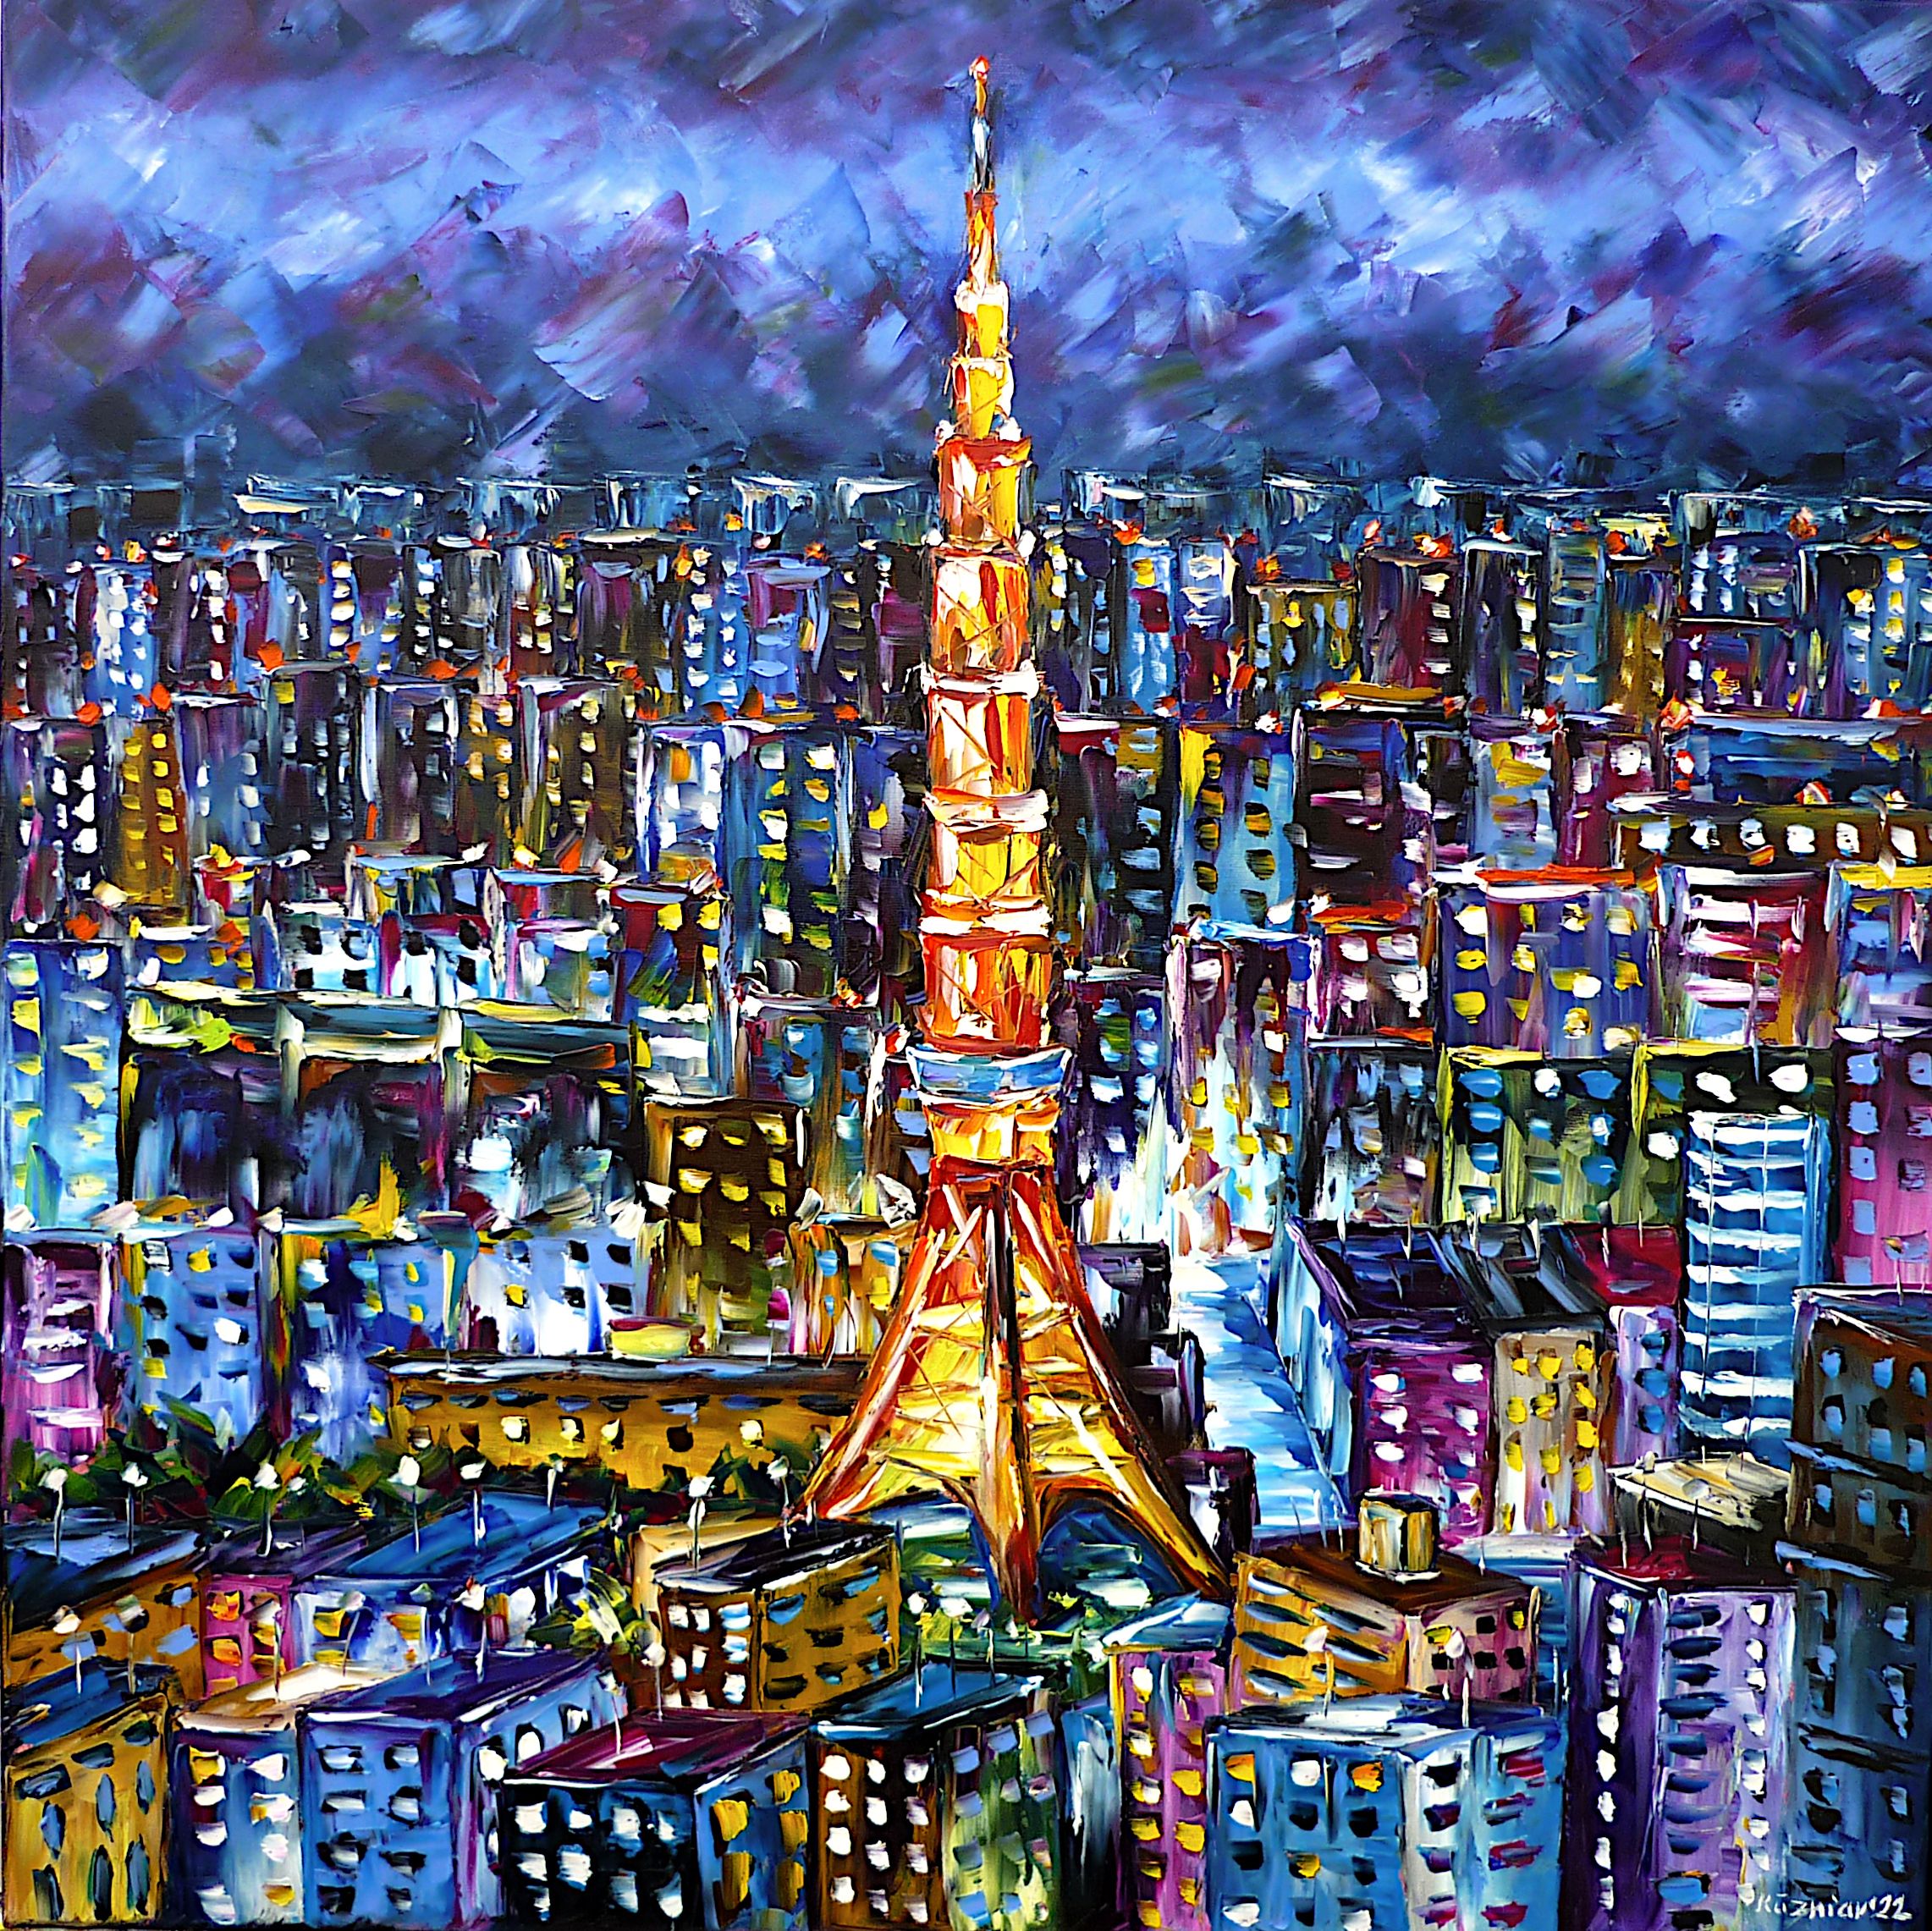 tokyo at night,shining tokyo,shining tokyo night,shining city lights,shining tokyo lights,luminous tower,tokyo lights,tokyo luminous,night lights,night sky,tokyo night,city at night,luminous city,luminous houses,city lights,night painting,night picture,abstract night,night light,tokyo skyline,tokyo from above,tokyo tower,tokyo cityscape,houses of tokyo,tokyo skyscrapers,tokyo colorful,tokyo abstract,tokyo city,tokyo painting,tokyo picture,tokyo tv tower,tokyo love,tokyo lovers,i love tokyo,japan,sky over the city,square format,square picture,square painting,palette knife oil painting,modern art,modern painting,impressionism,expressionism,abstract painting,lively colors,colorful painting,bright colors,light reflections,impasto painting,figurative